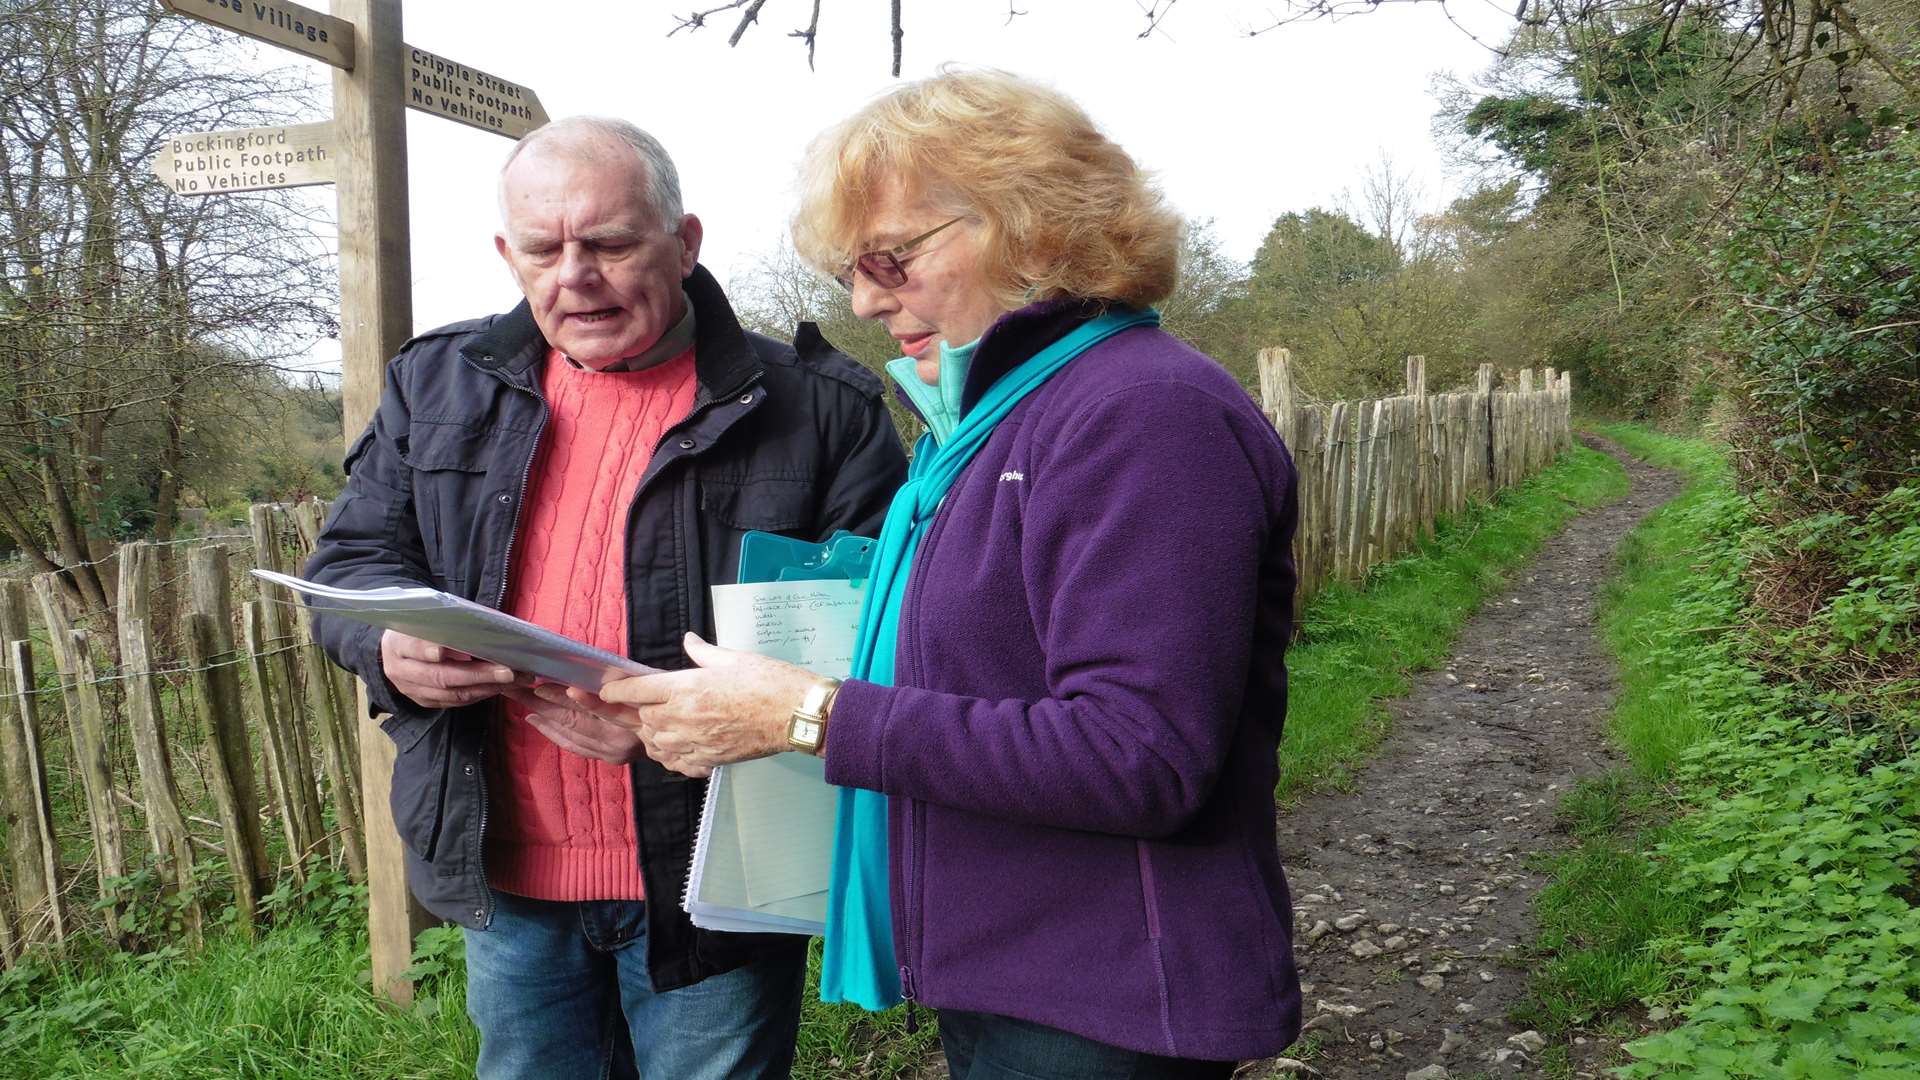 Cllr Hotson and resident Hilary Hunt examine the plans on the site of the proposed greenway